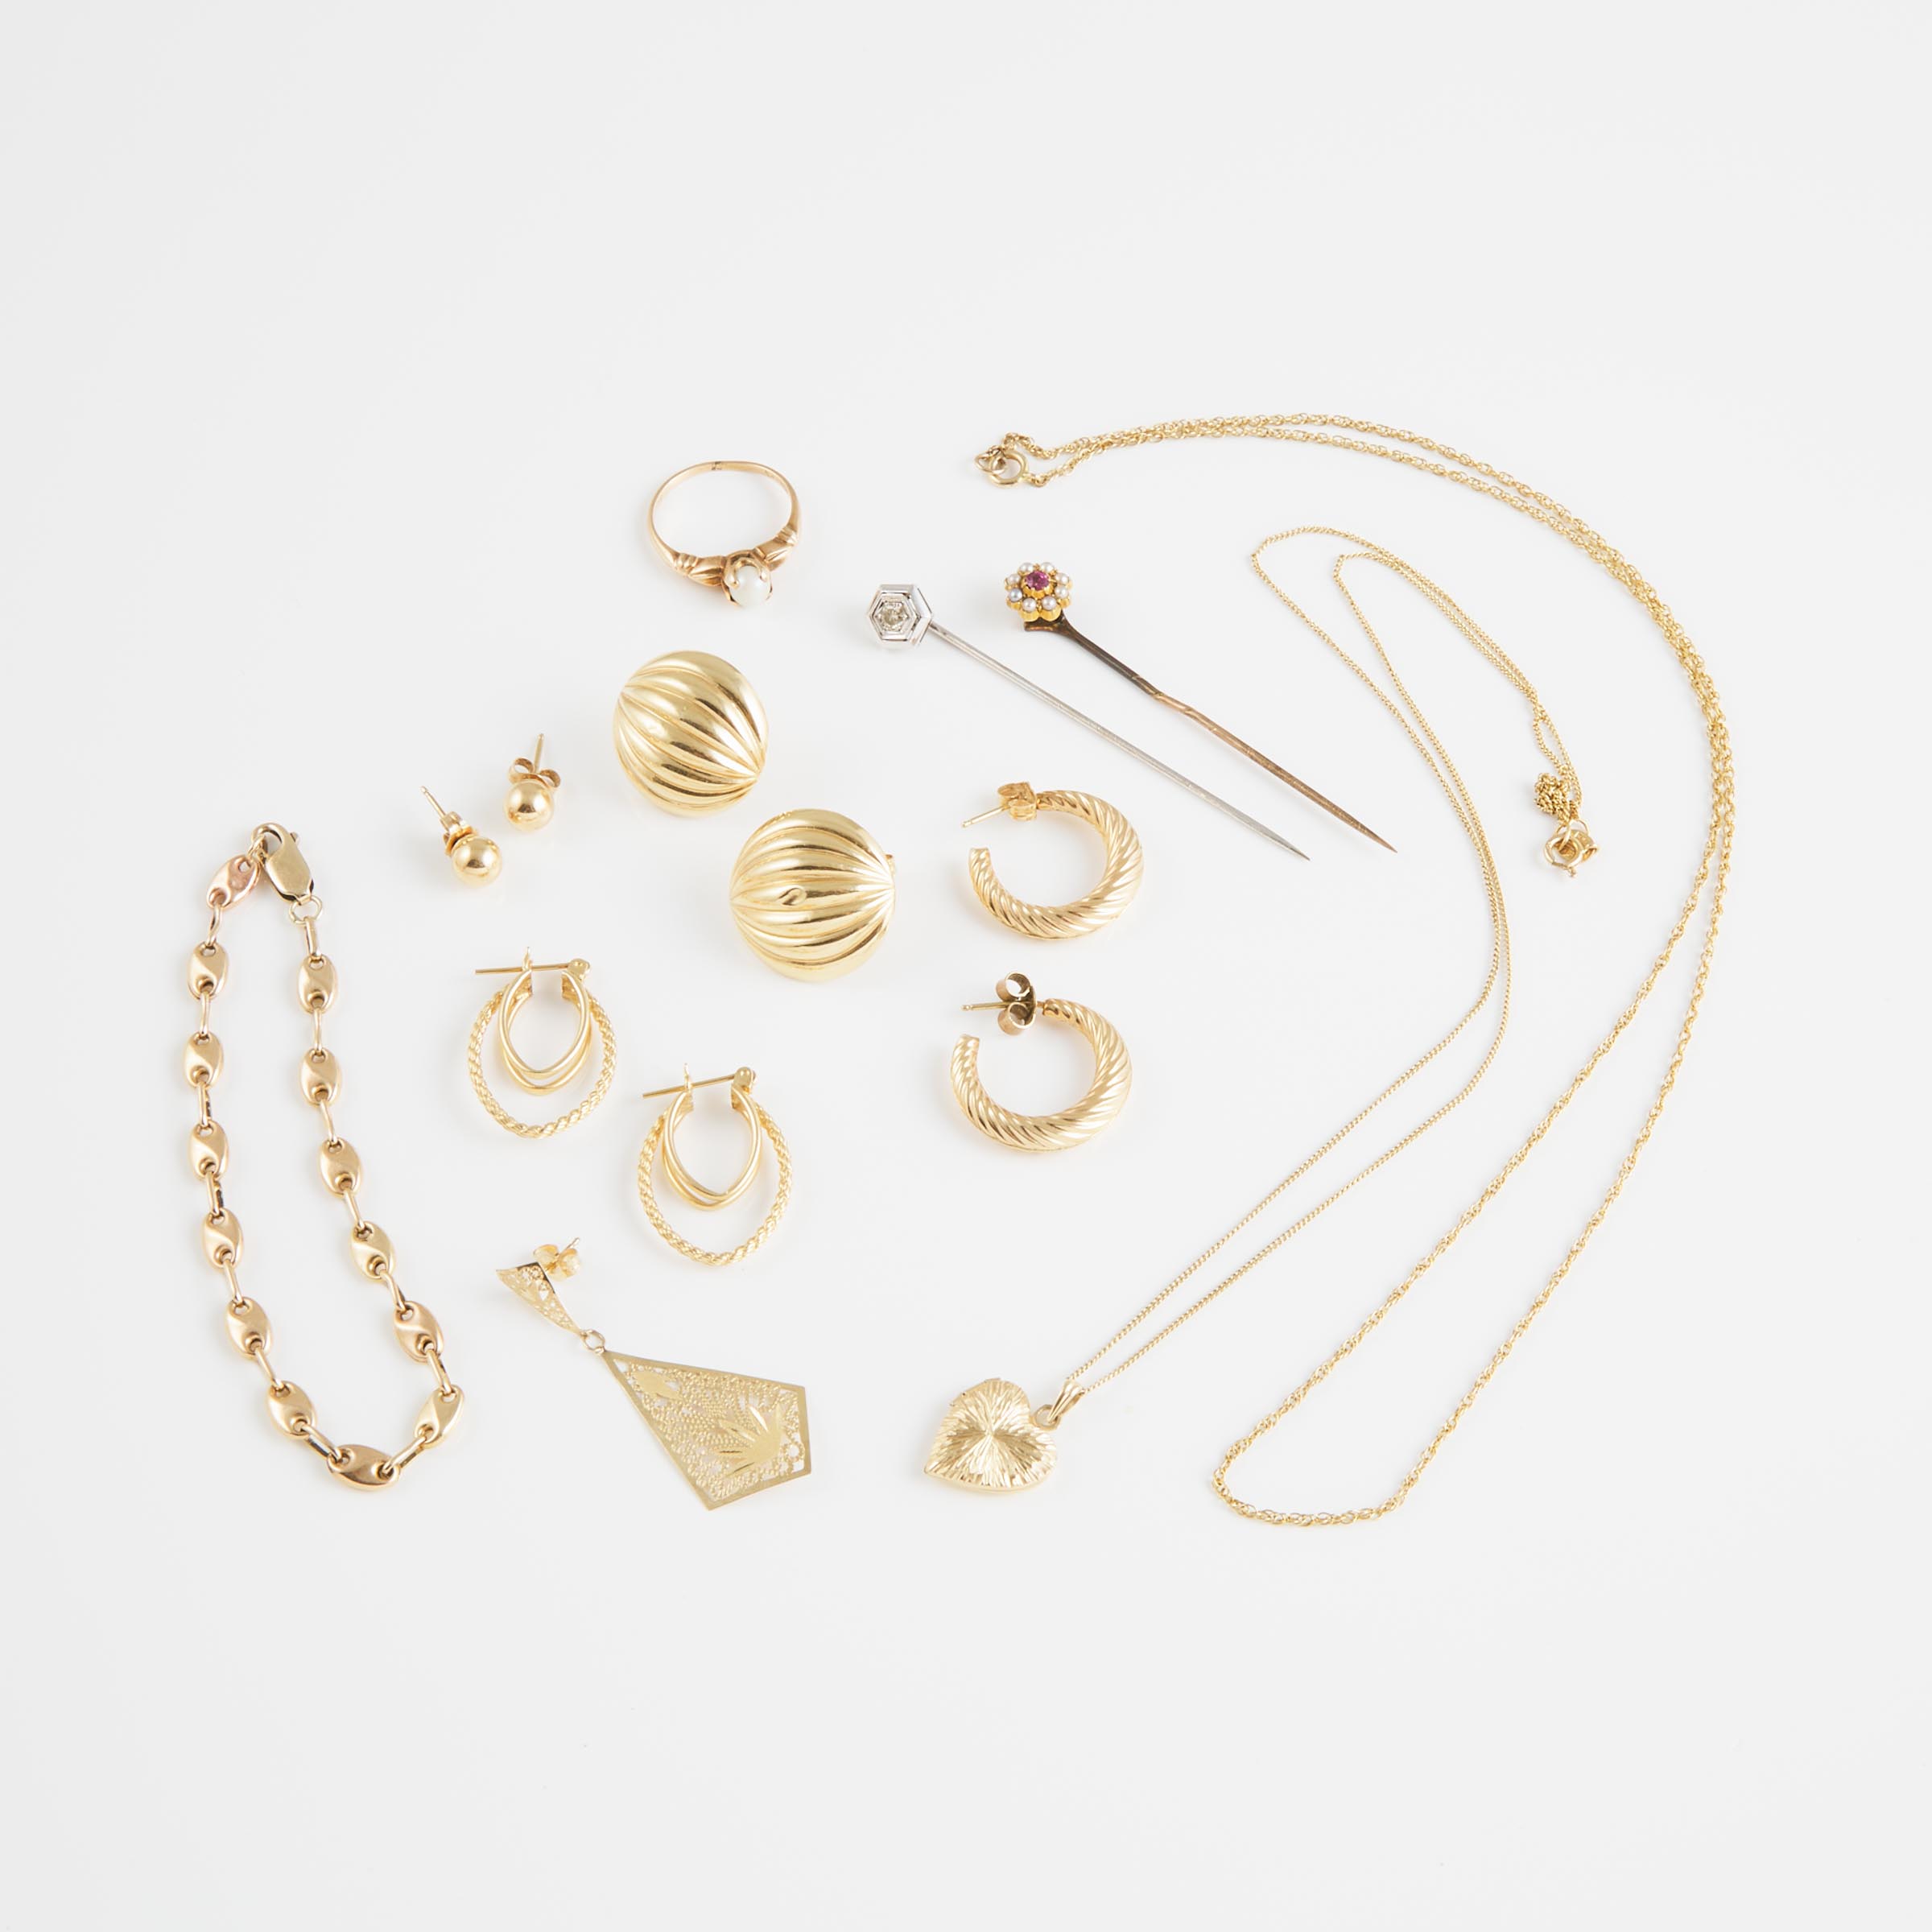 Small Group Of Gold Jewellery